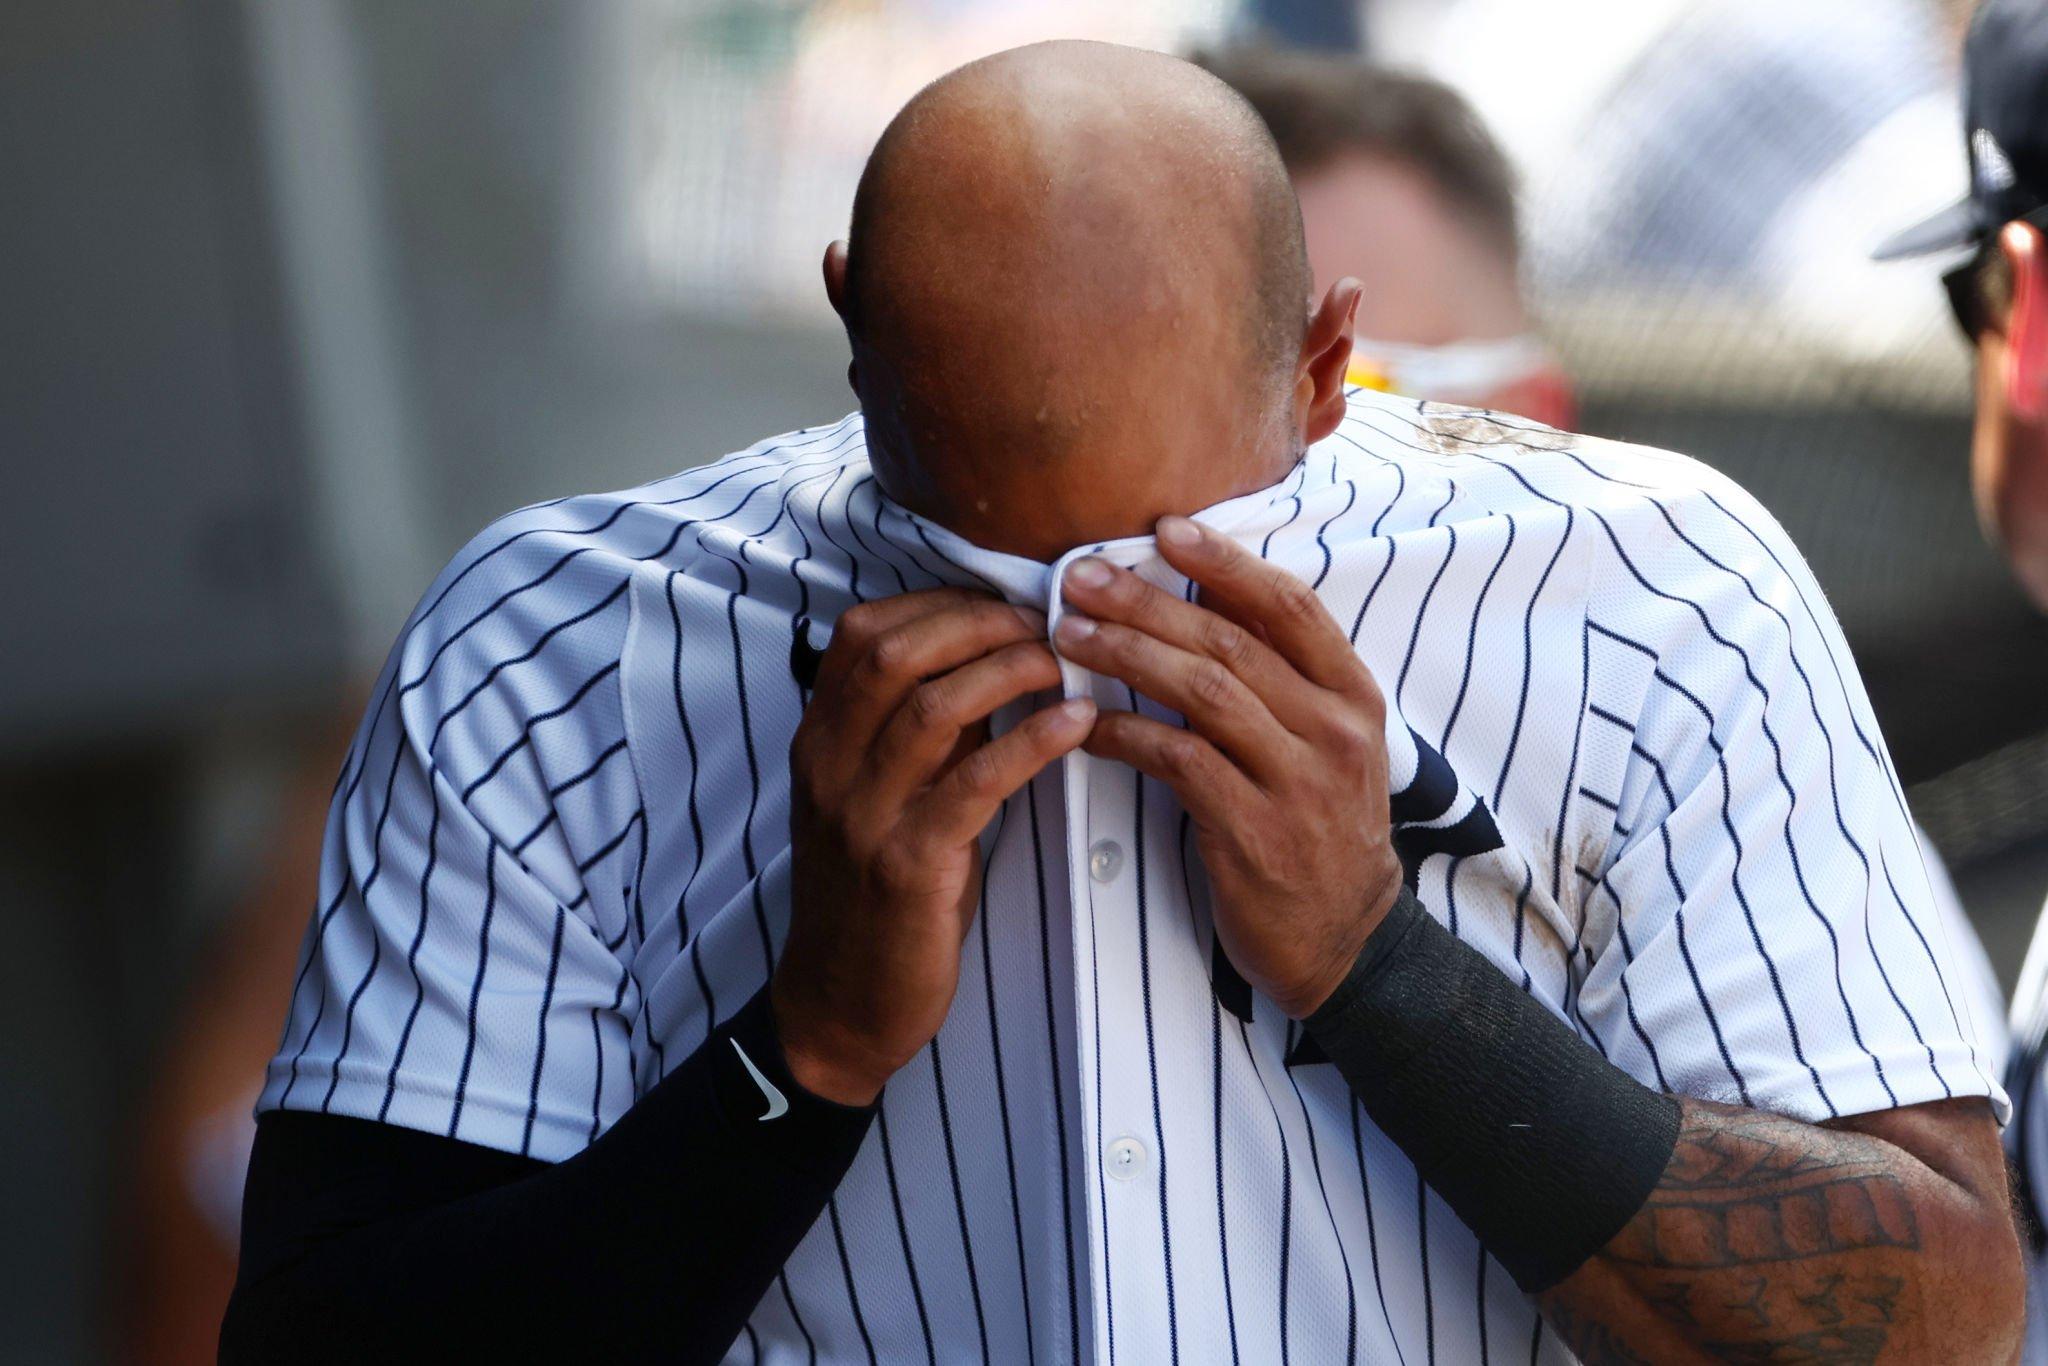 Yankees cut Aaron Hicks after veteran outfielder's eight years in New York  